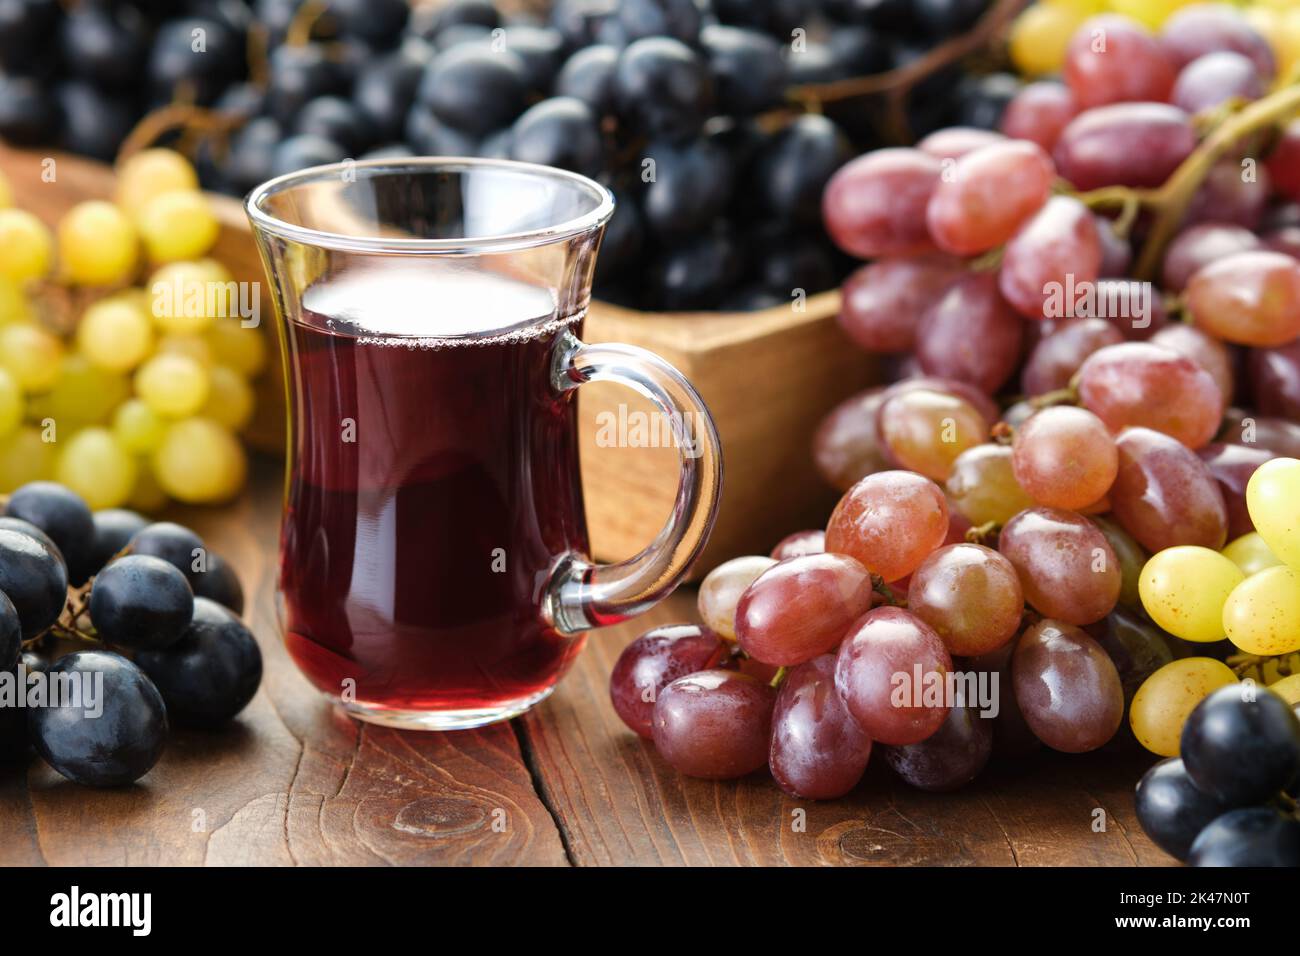 A glass cup of grape juice or wine. Black, green and purple grapes on table. Stock Photo